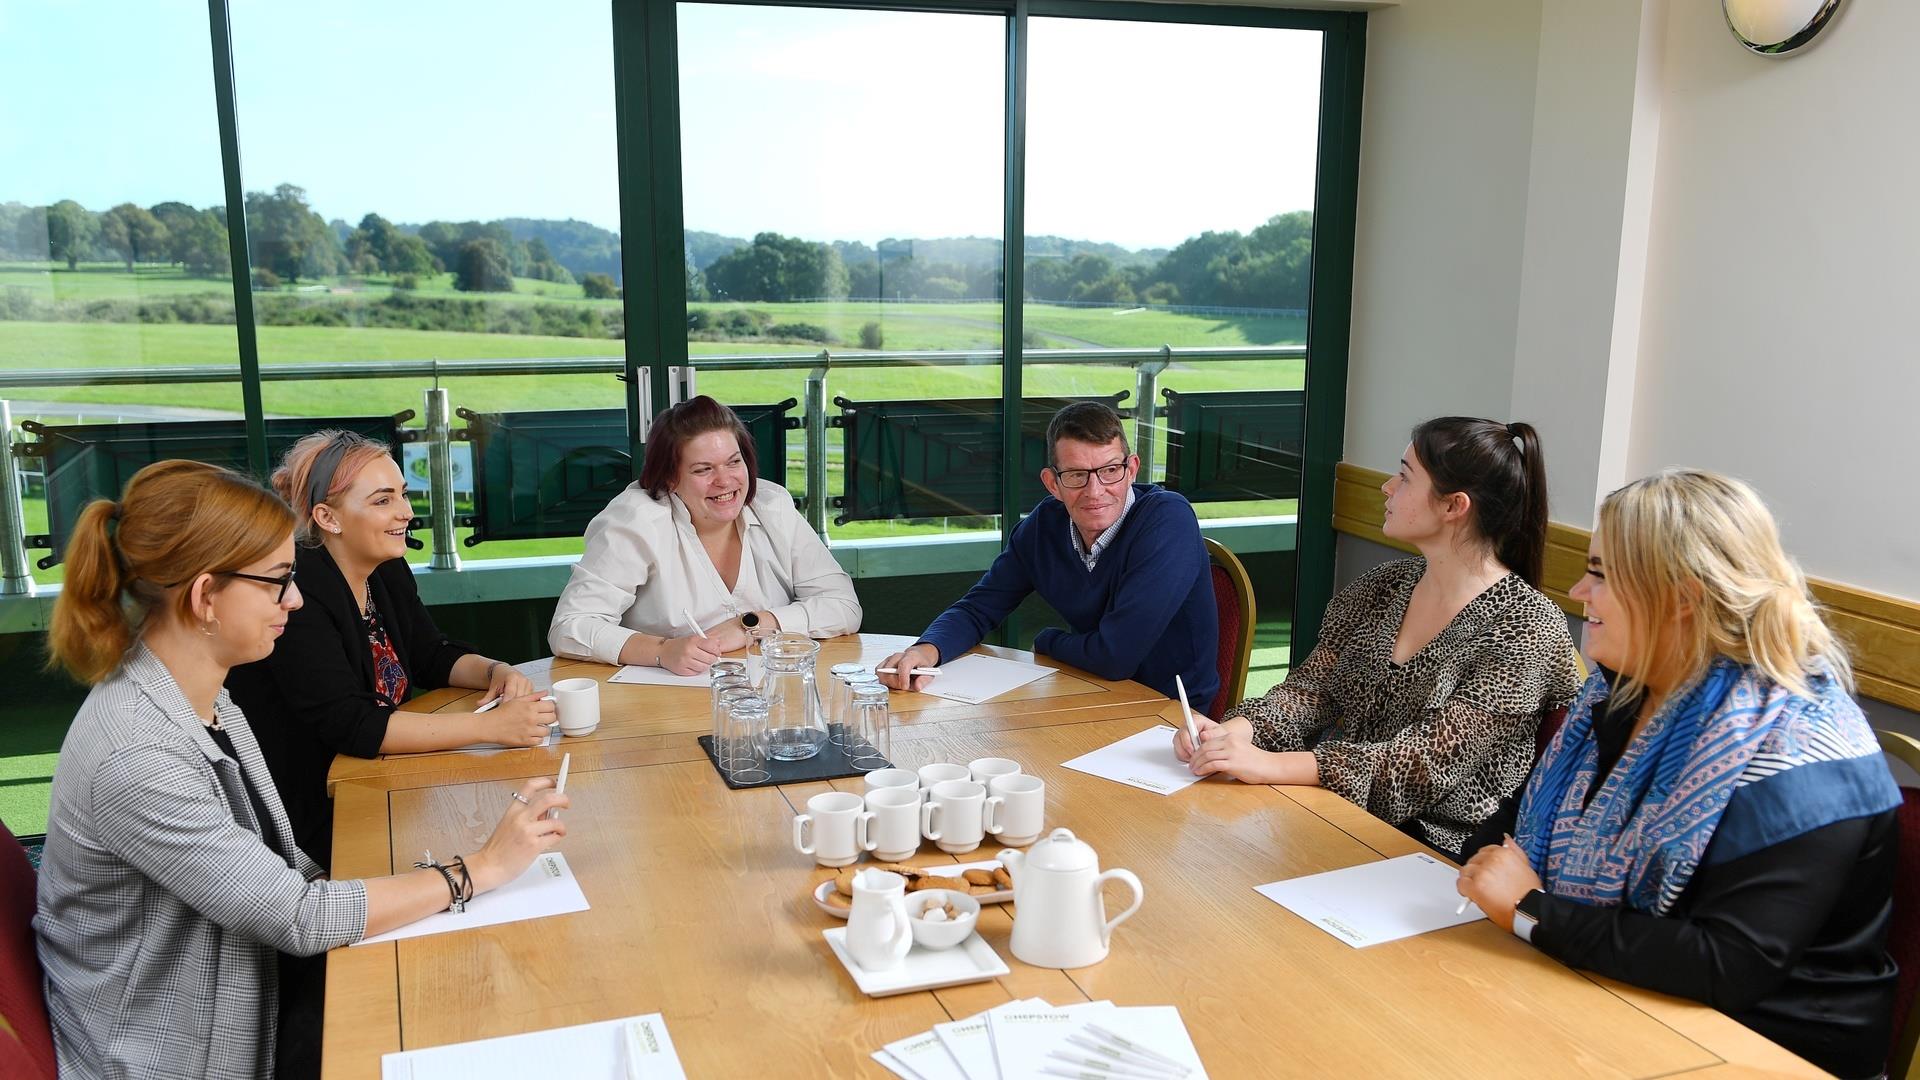 Meeting at Chepstow Racecourse